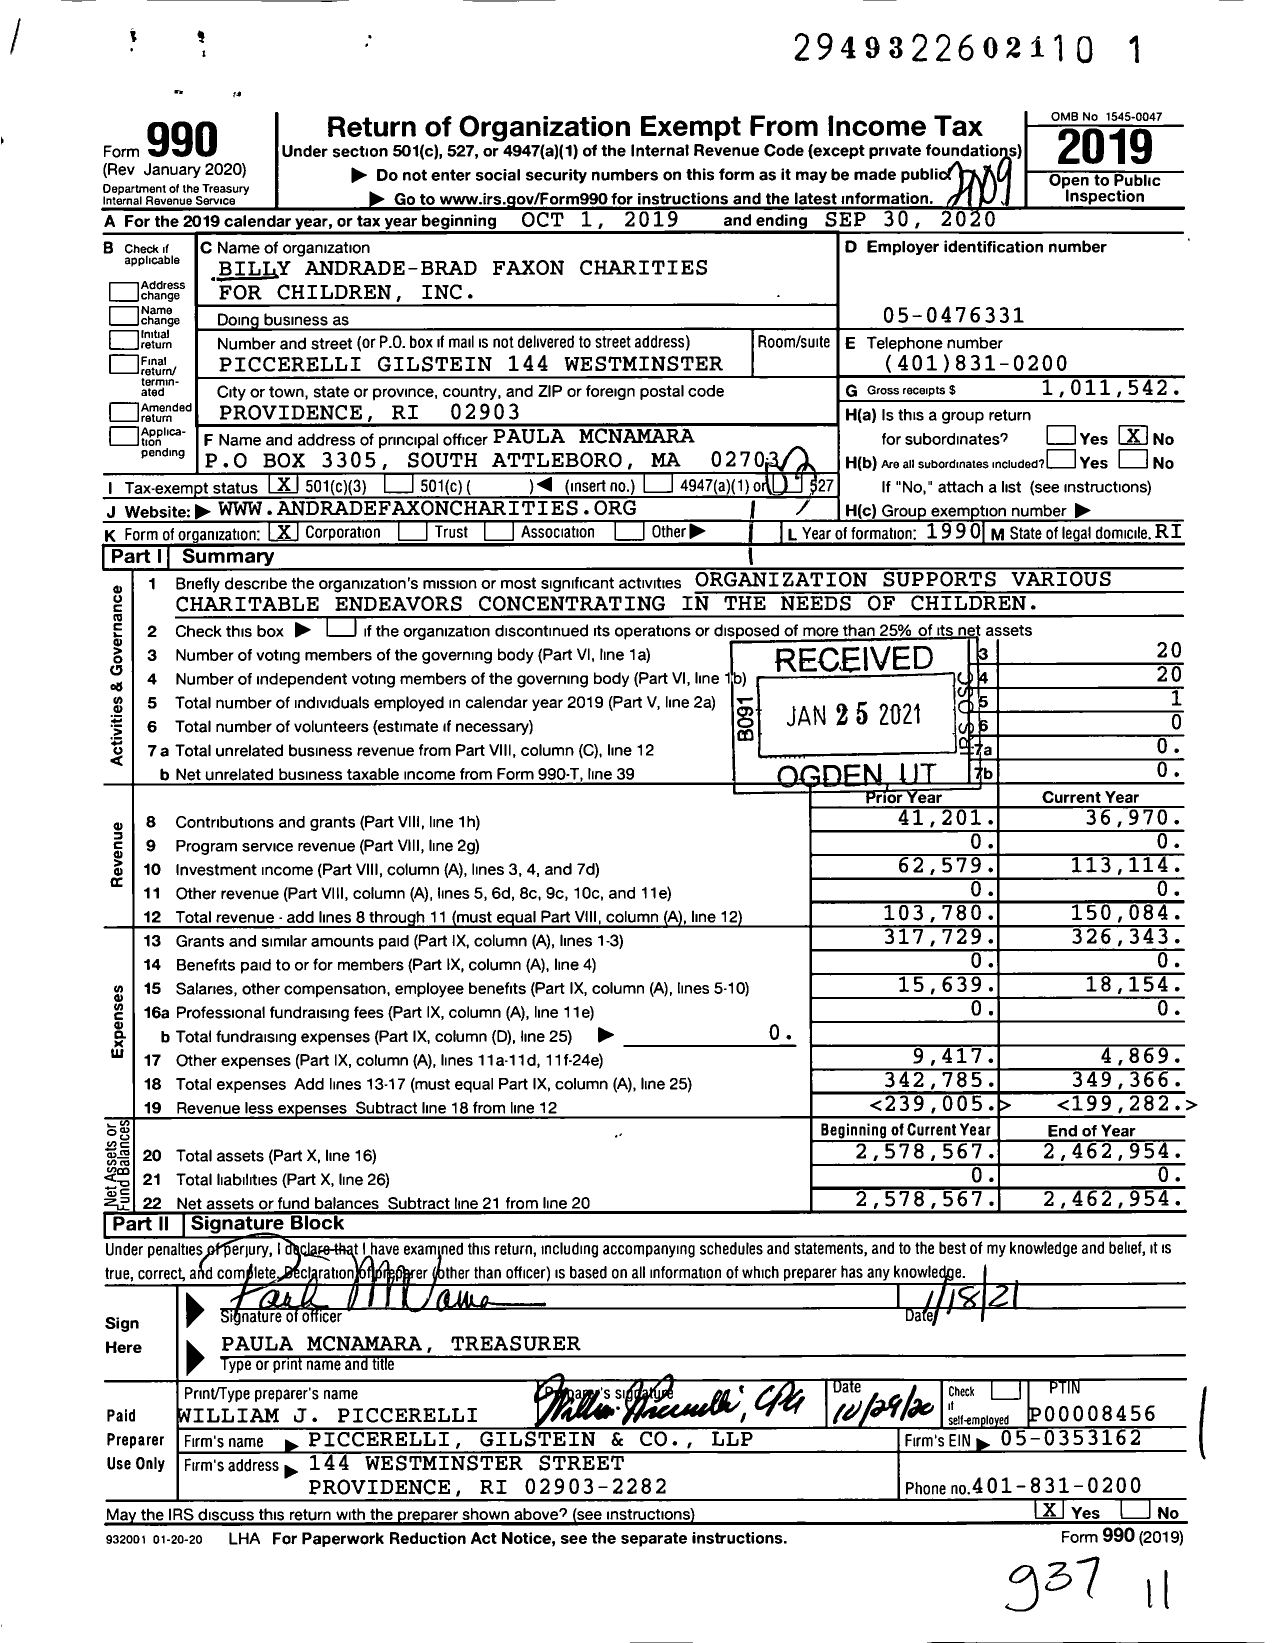 Image of first page of 2019 Form 990 for Billy Andrade-Brad Faxon Charities for Children